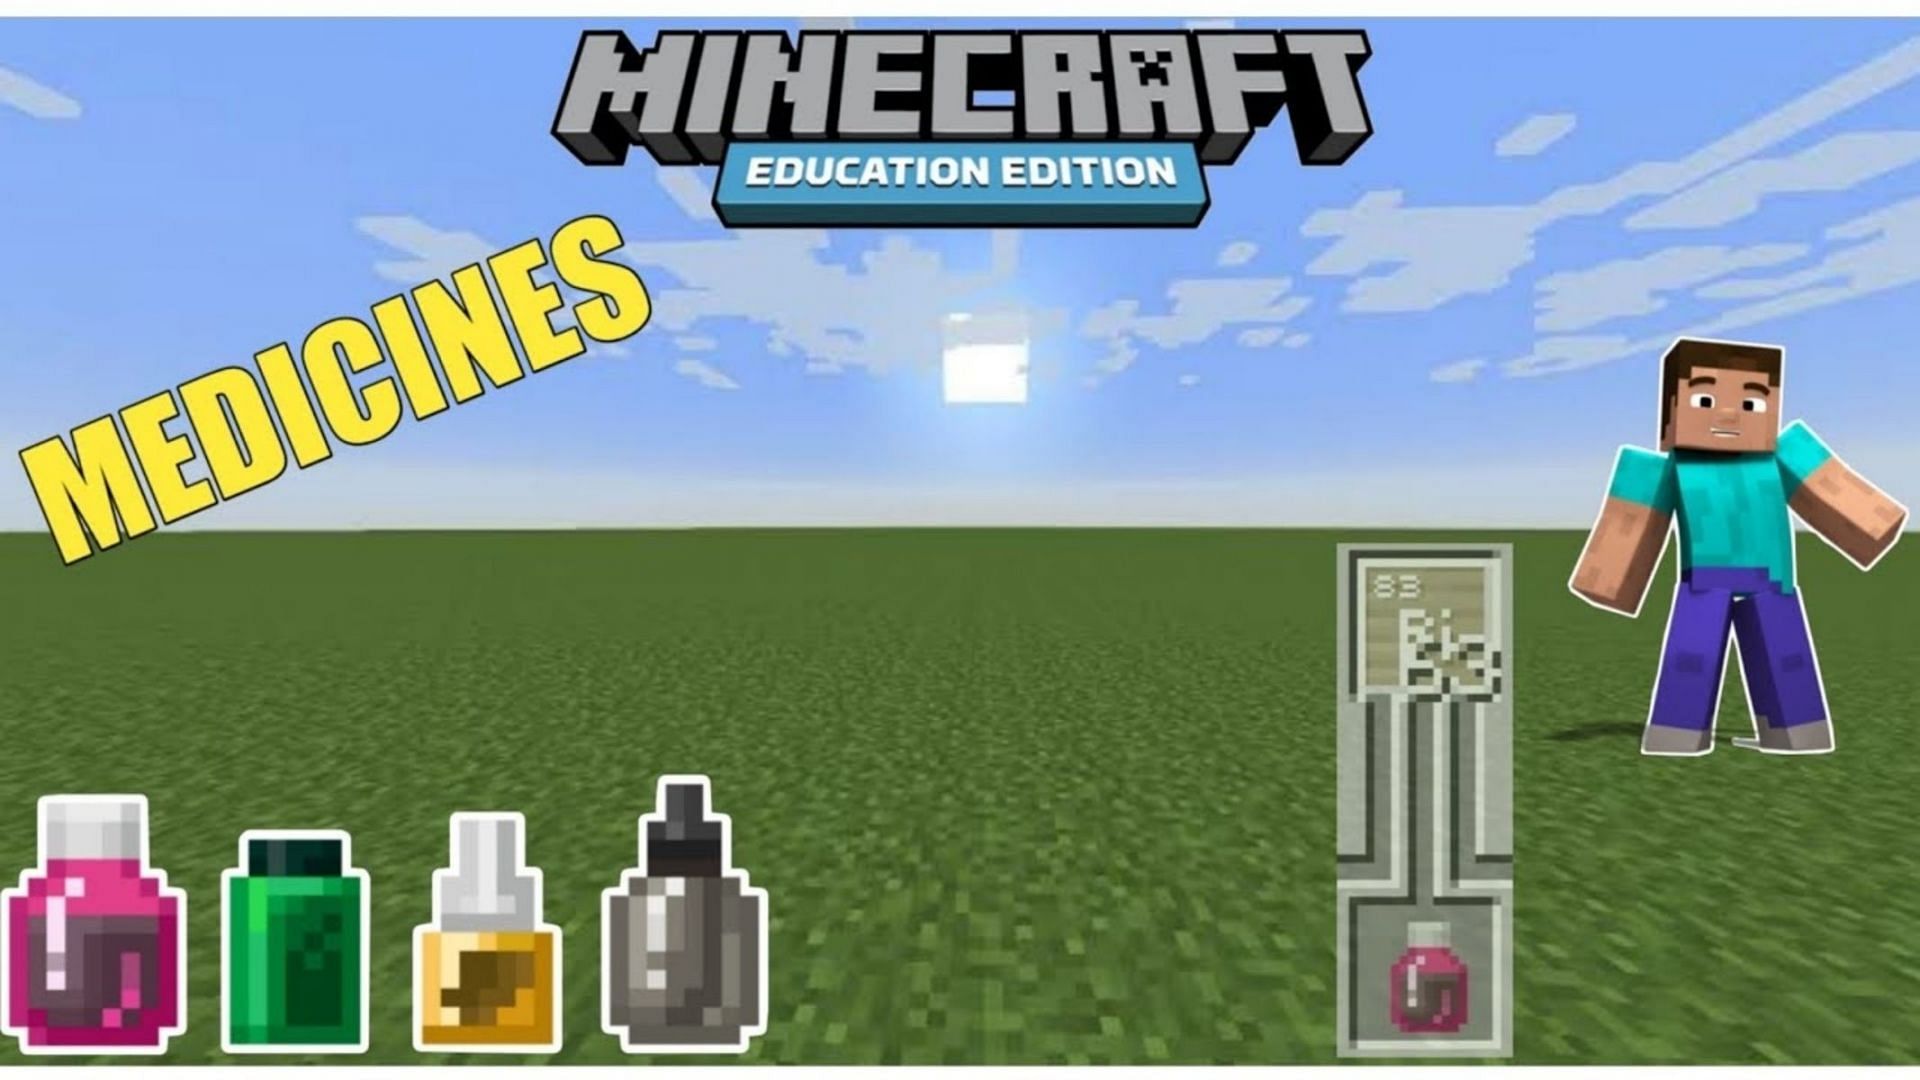 Tonic (pink) is one of the four medicines accessible in Minecraft: Education Edition (Image via Mojang)